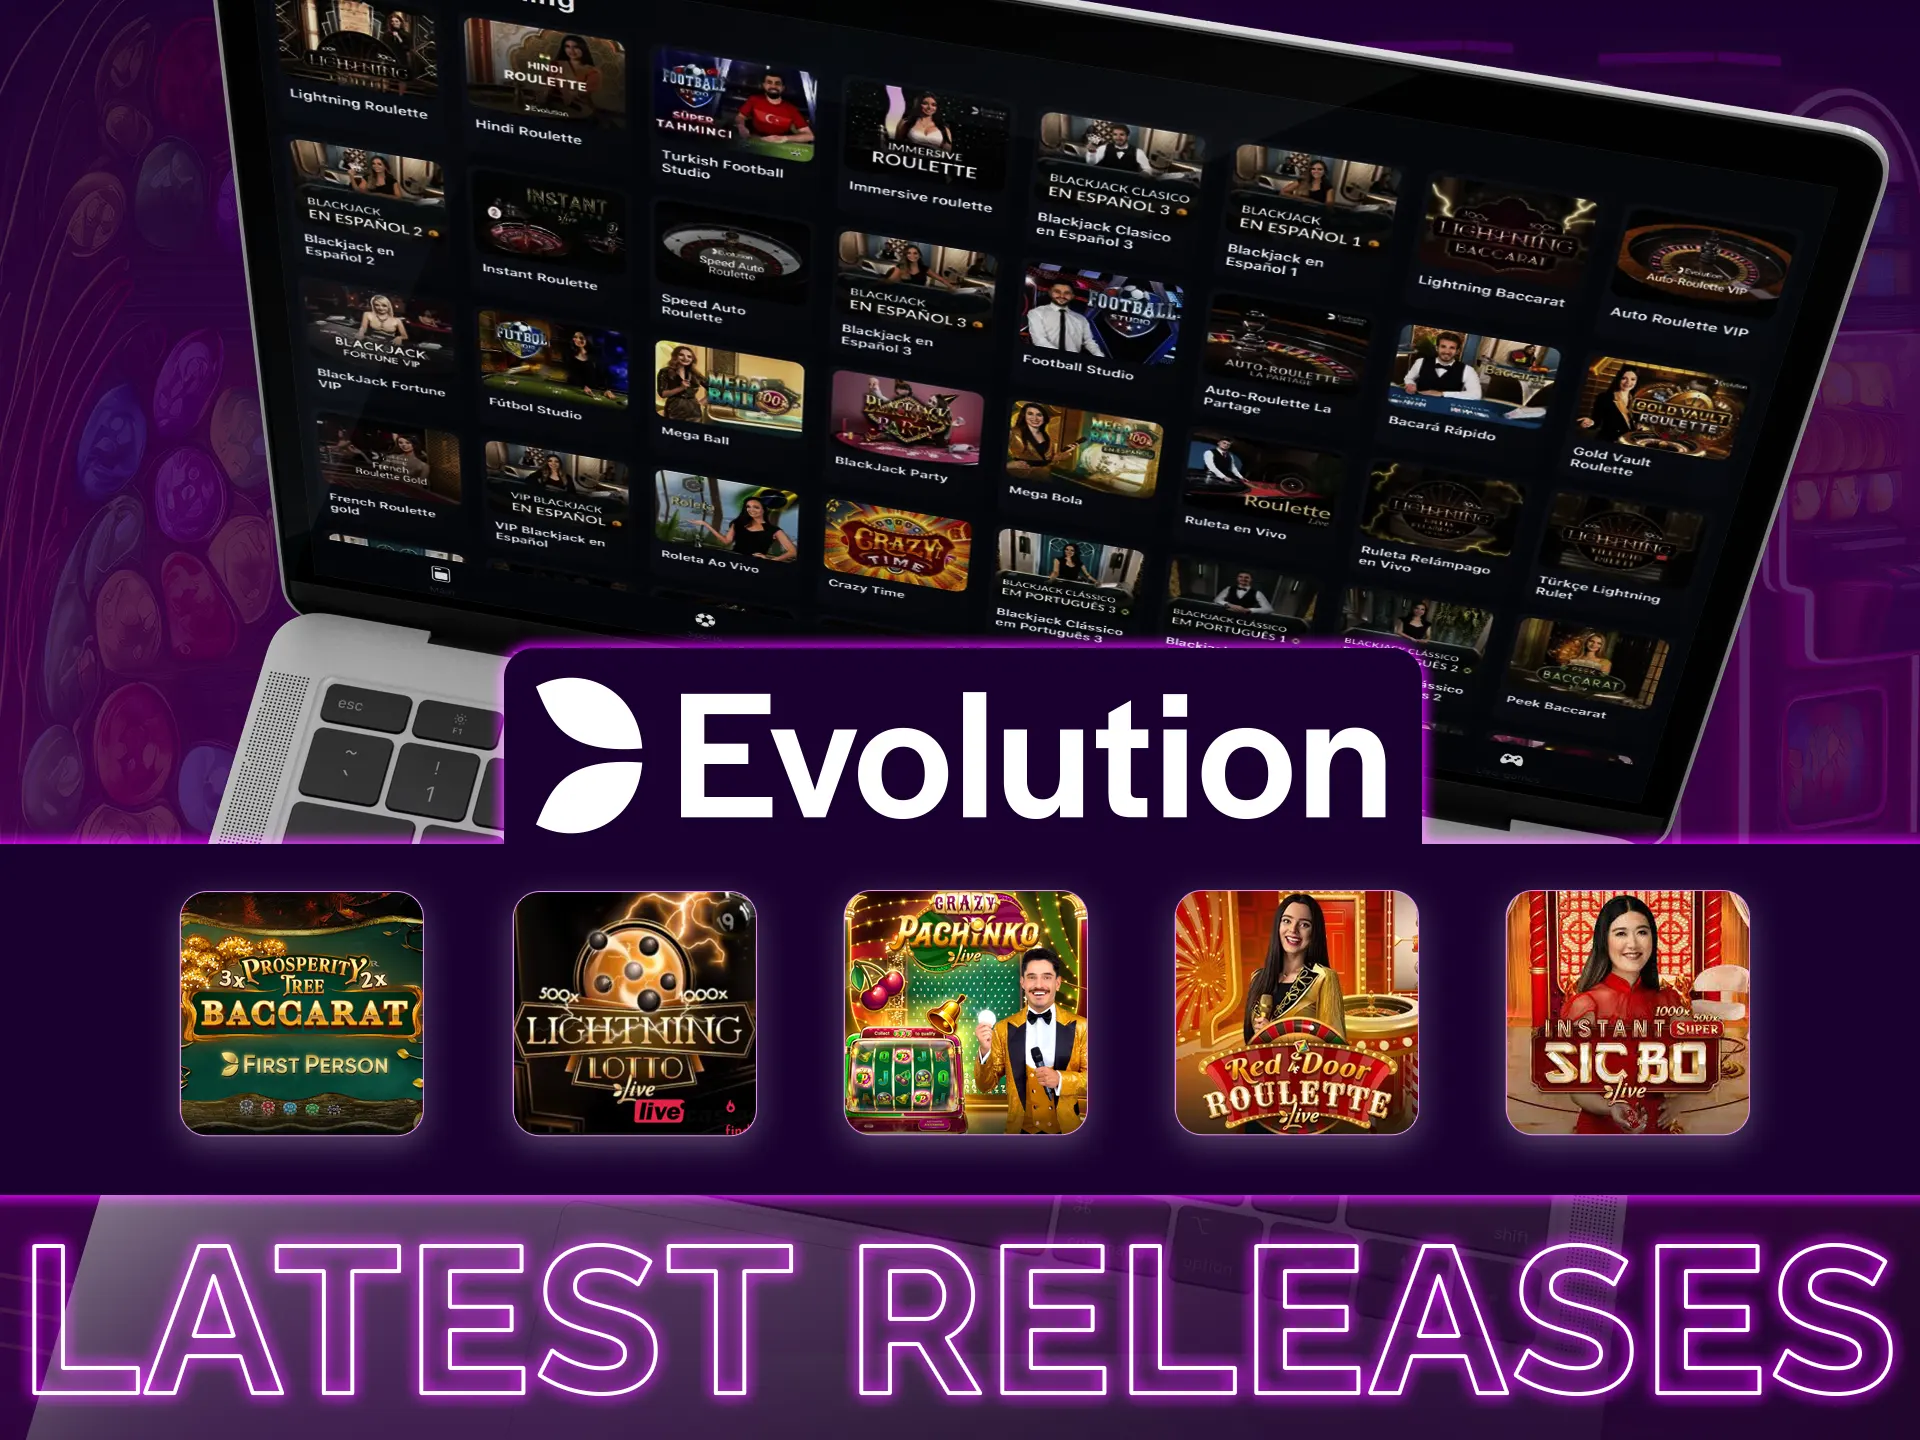 Evolution Gaming releases new live dealer games like Instant Super Sic Bo, Red Door Roulette, and more, offering exciting features and payouts.